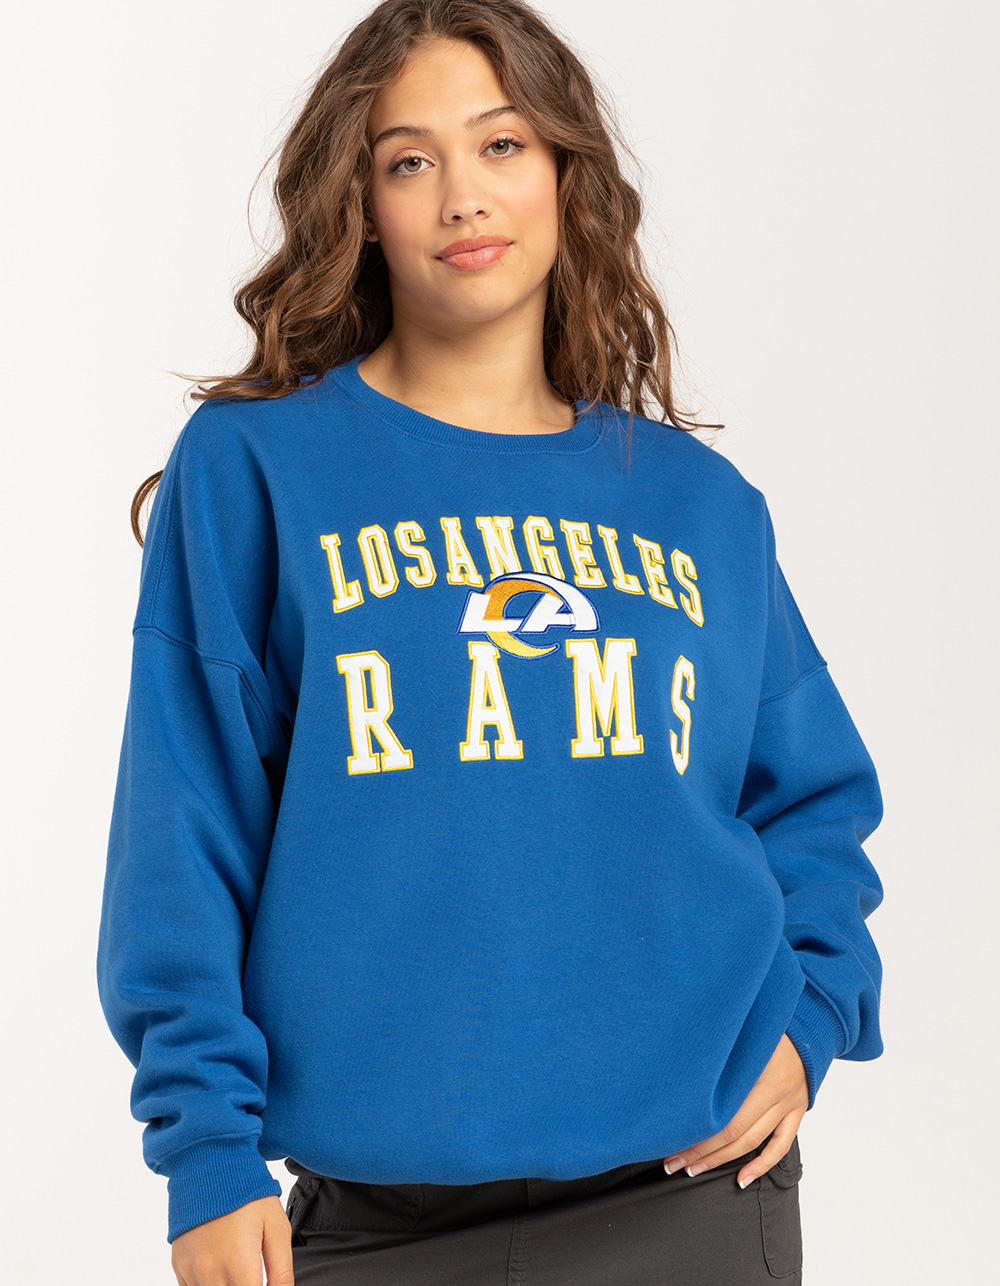 Nike Women's Fashion (NFL Los Angeles Rams) 3/4-Sleeve T-Shirt in Blue, Size: Small | NKNW054N95-06O